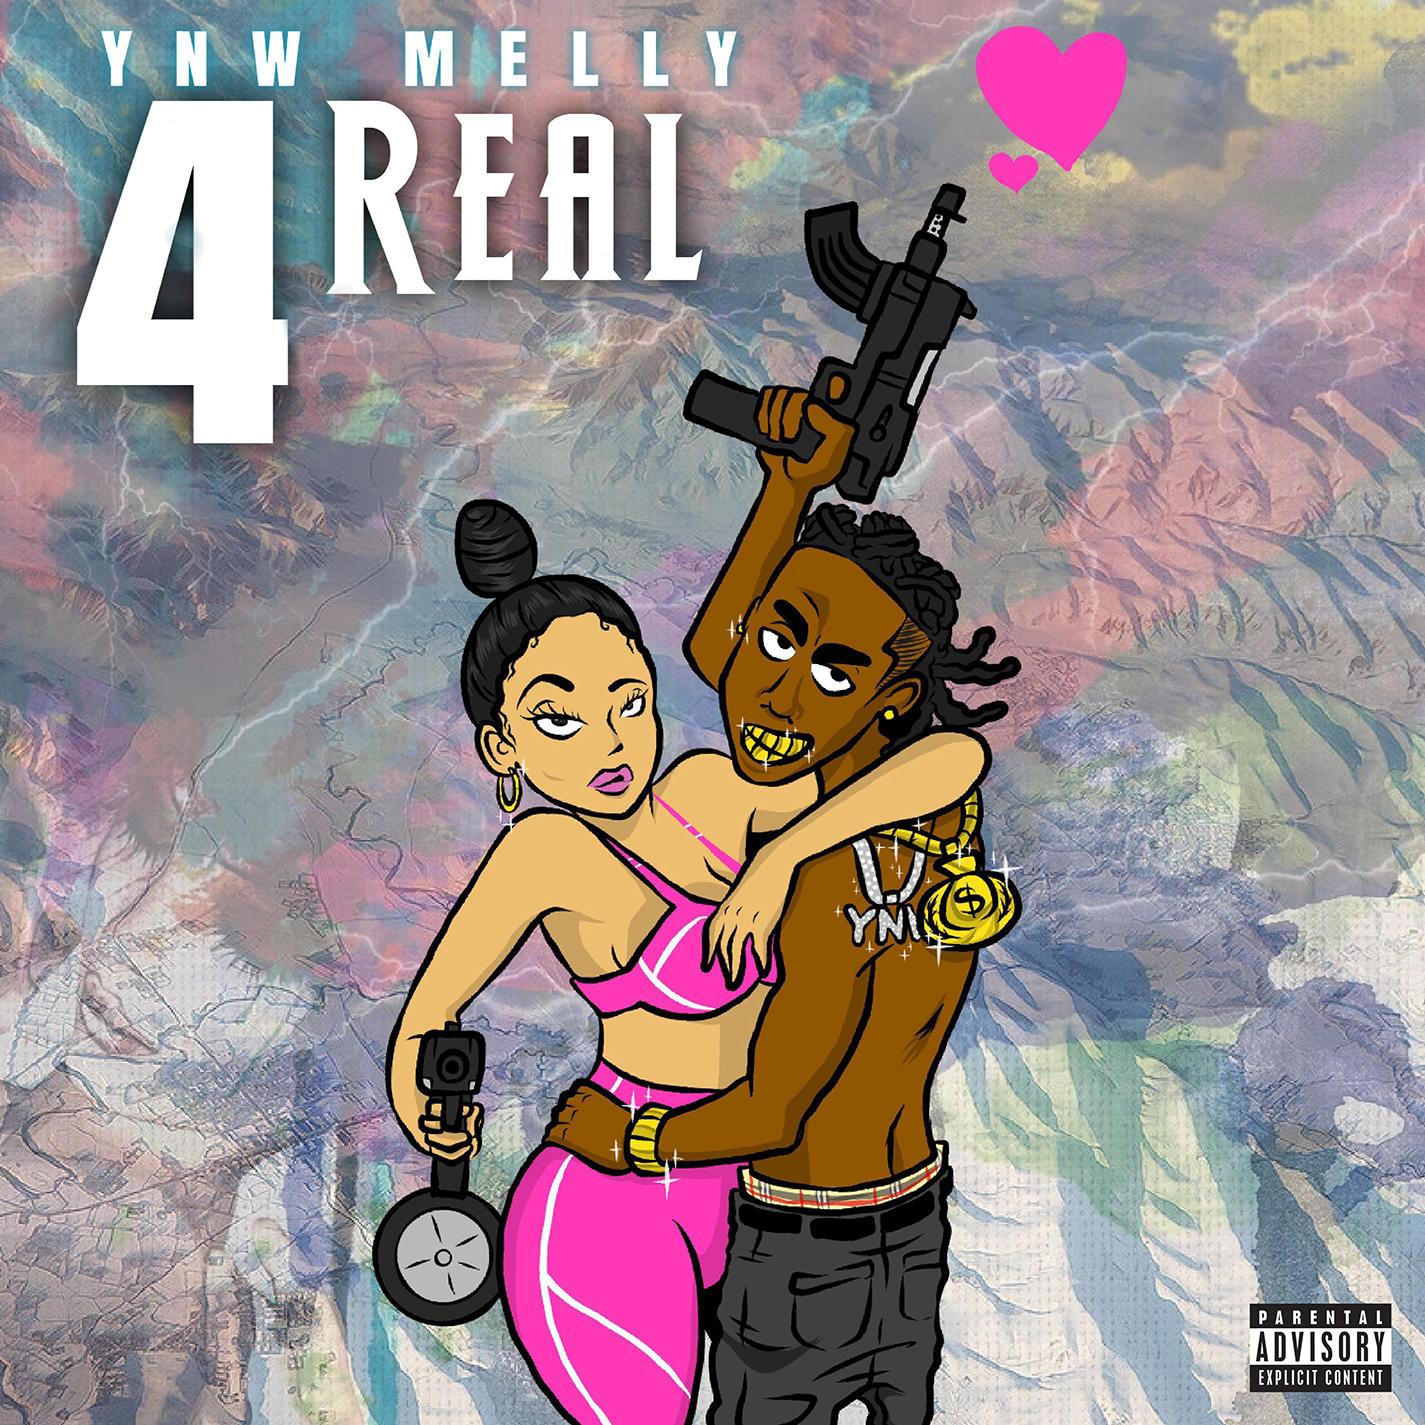 Stream Free Songs by YNW Melly & Similar Artists.